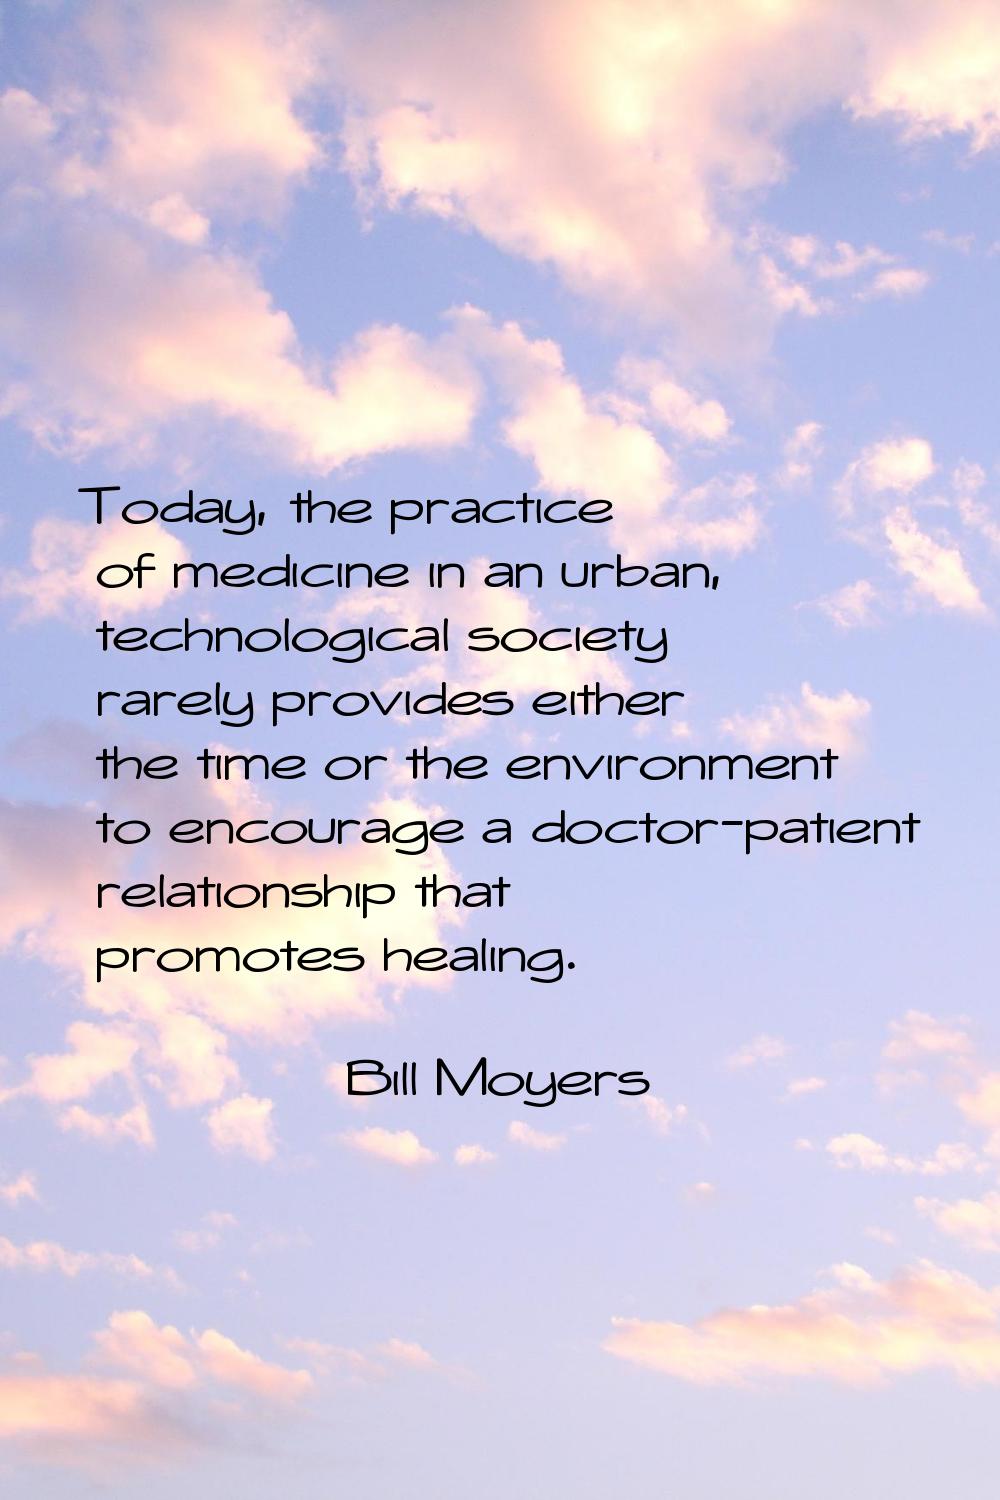 Today, the practice of medicine in an urban, technological society rarely provides either the time 